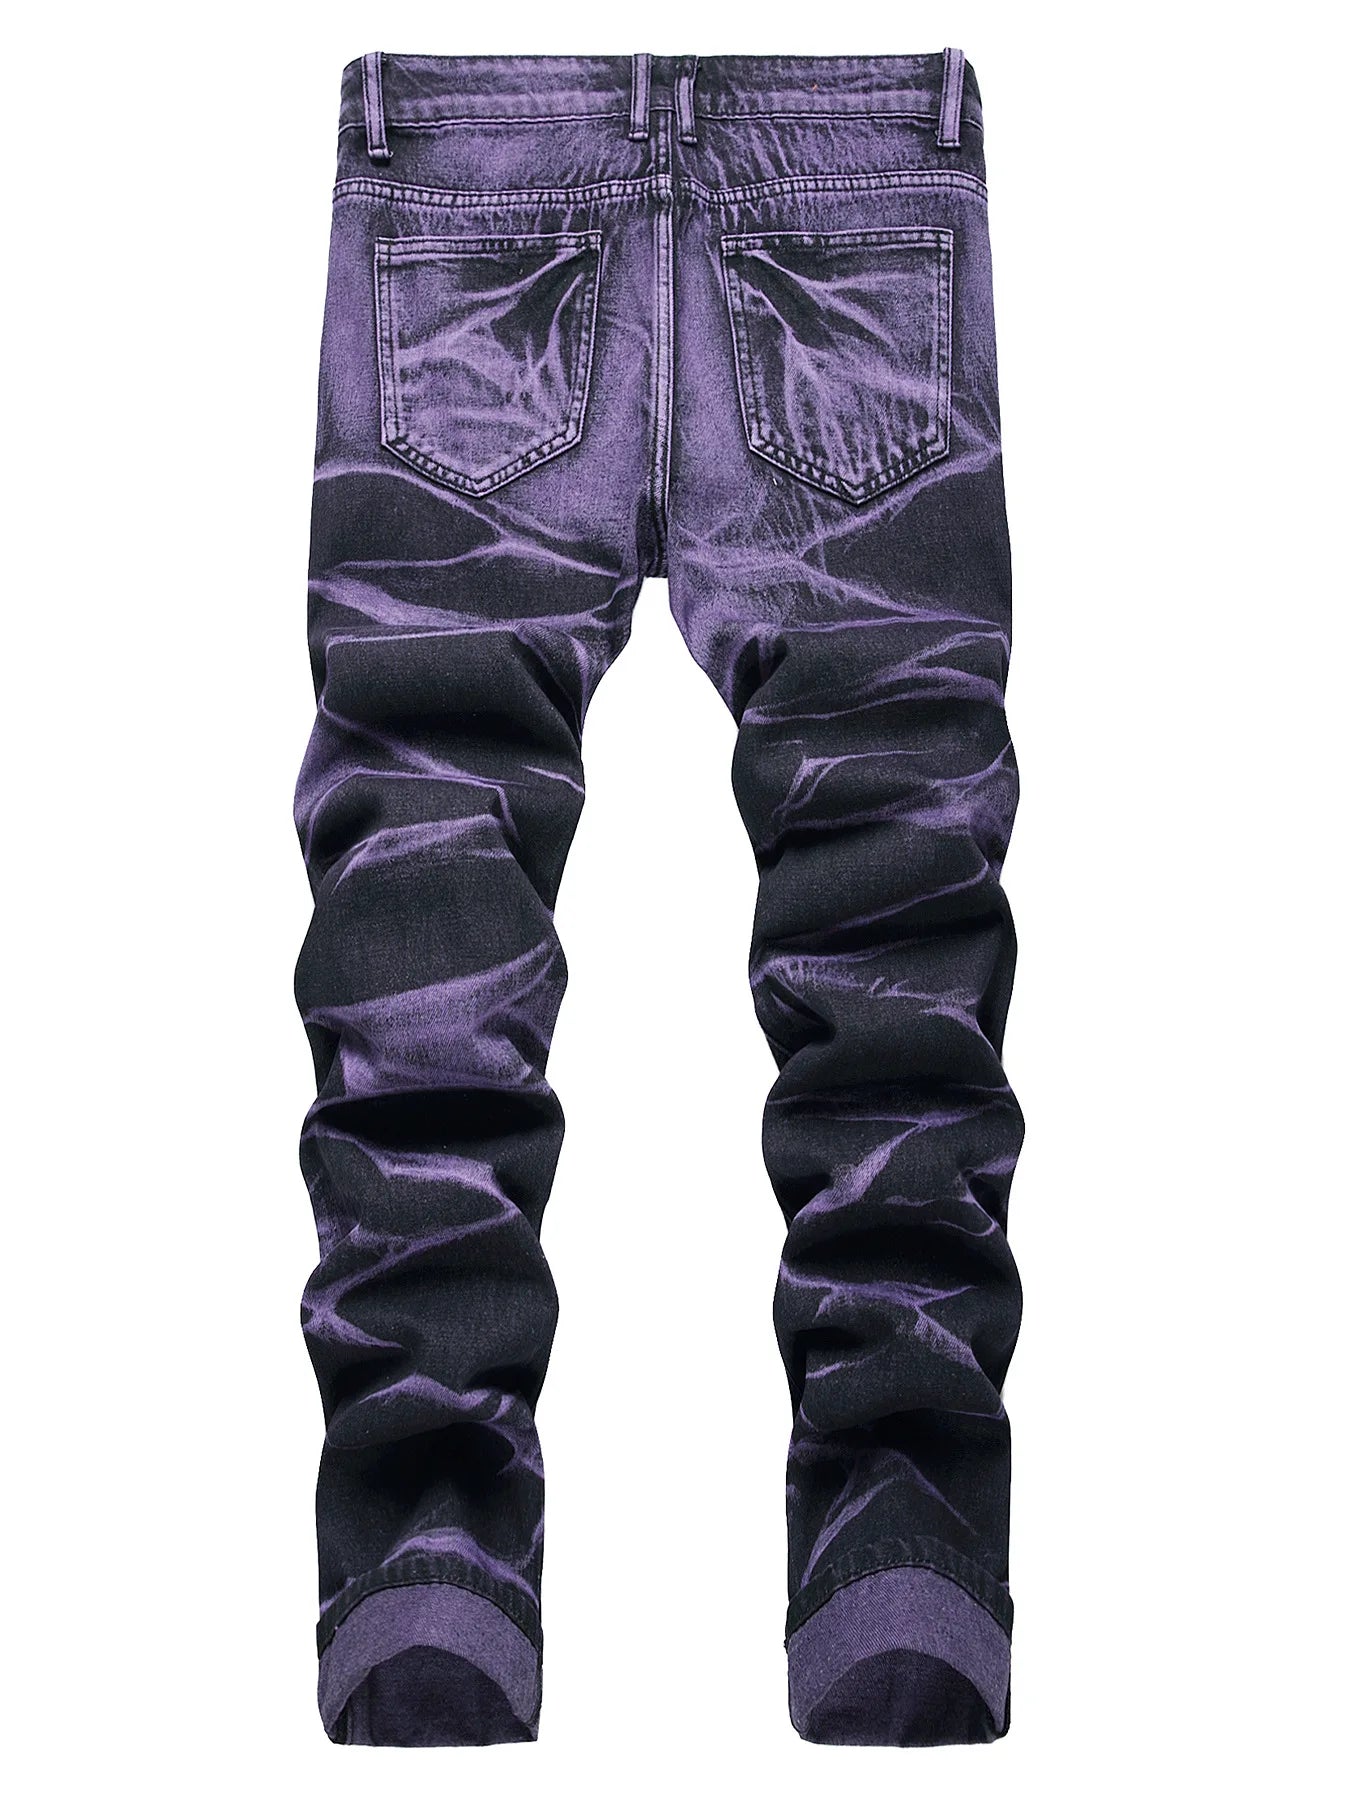 Ripped Black Purple Jeans For Men – Rahbeel